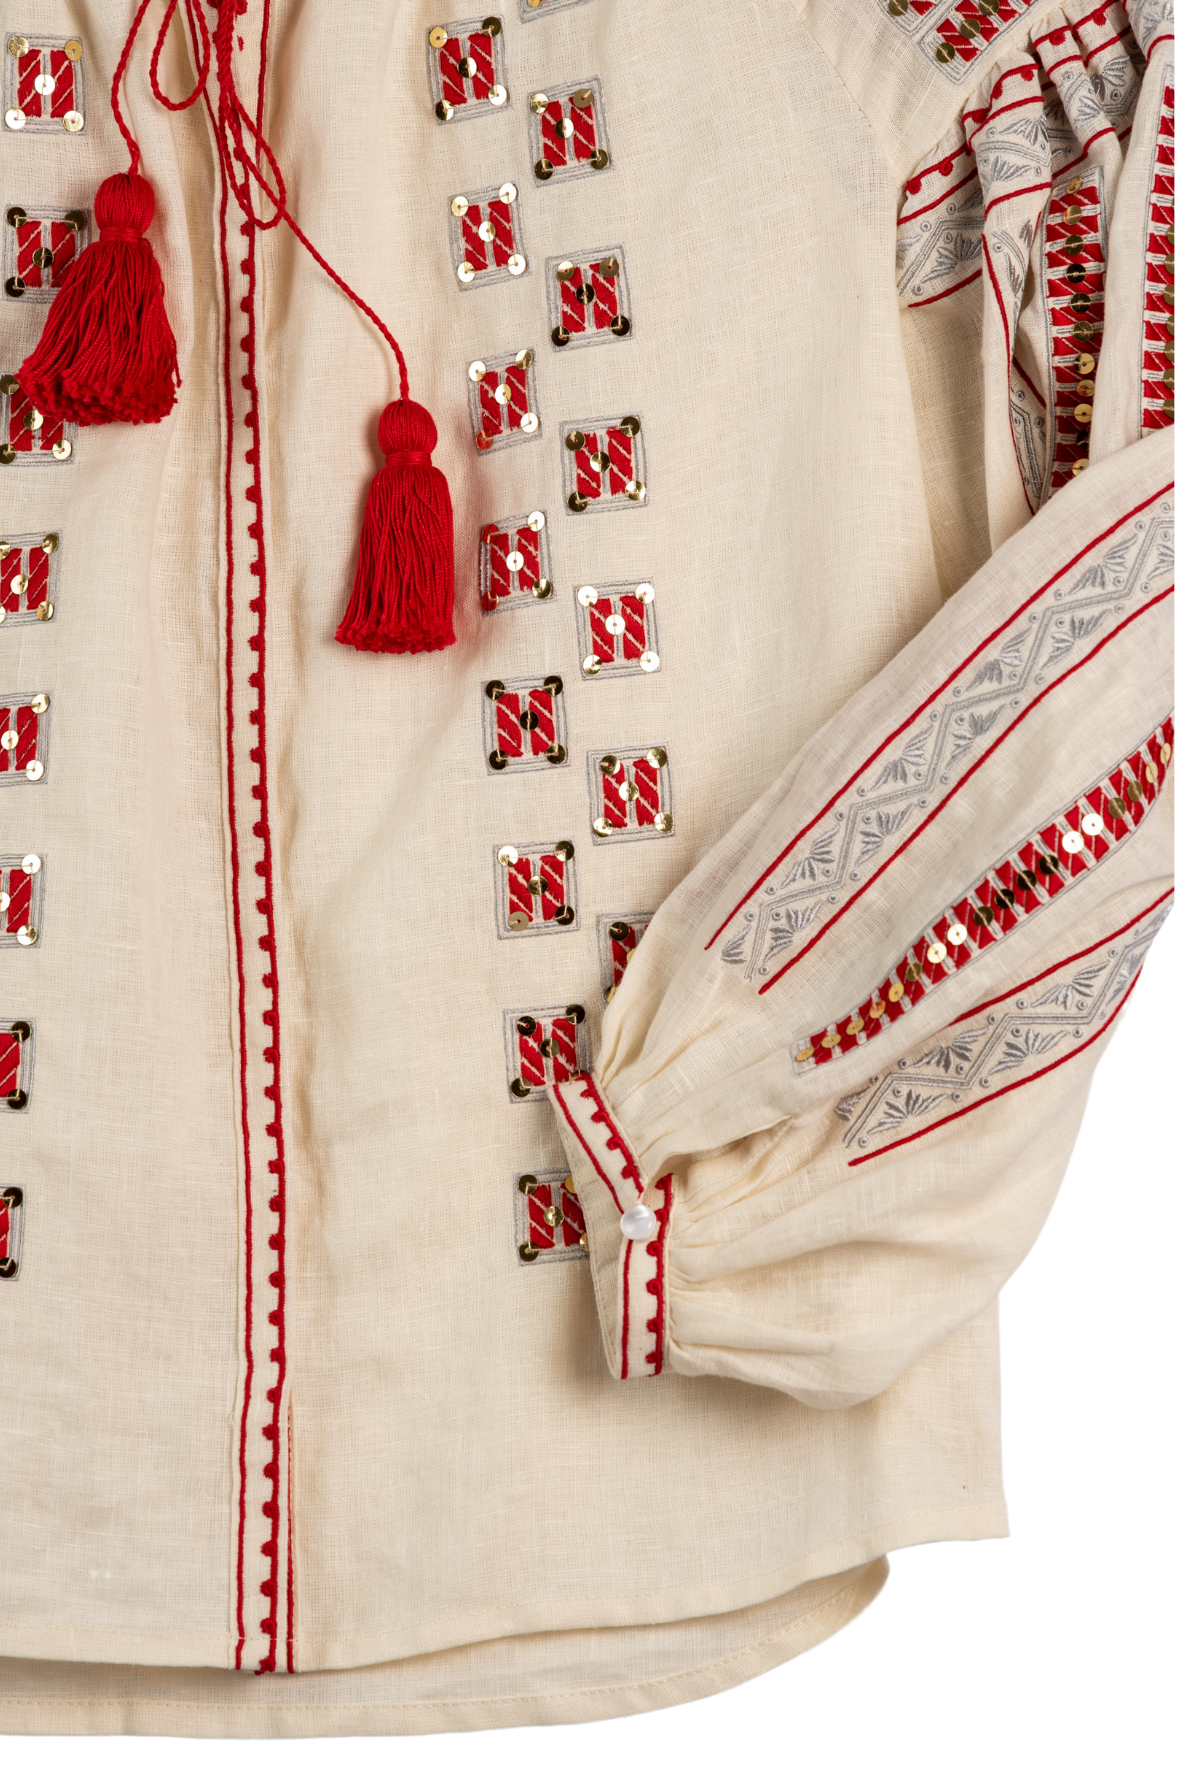 Anishka Embroidered Ukrainian Top - Ivory, Red, Silver